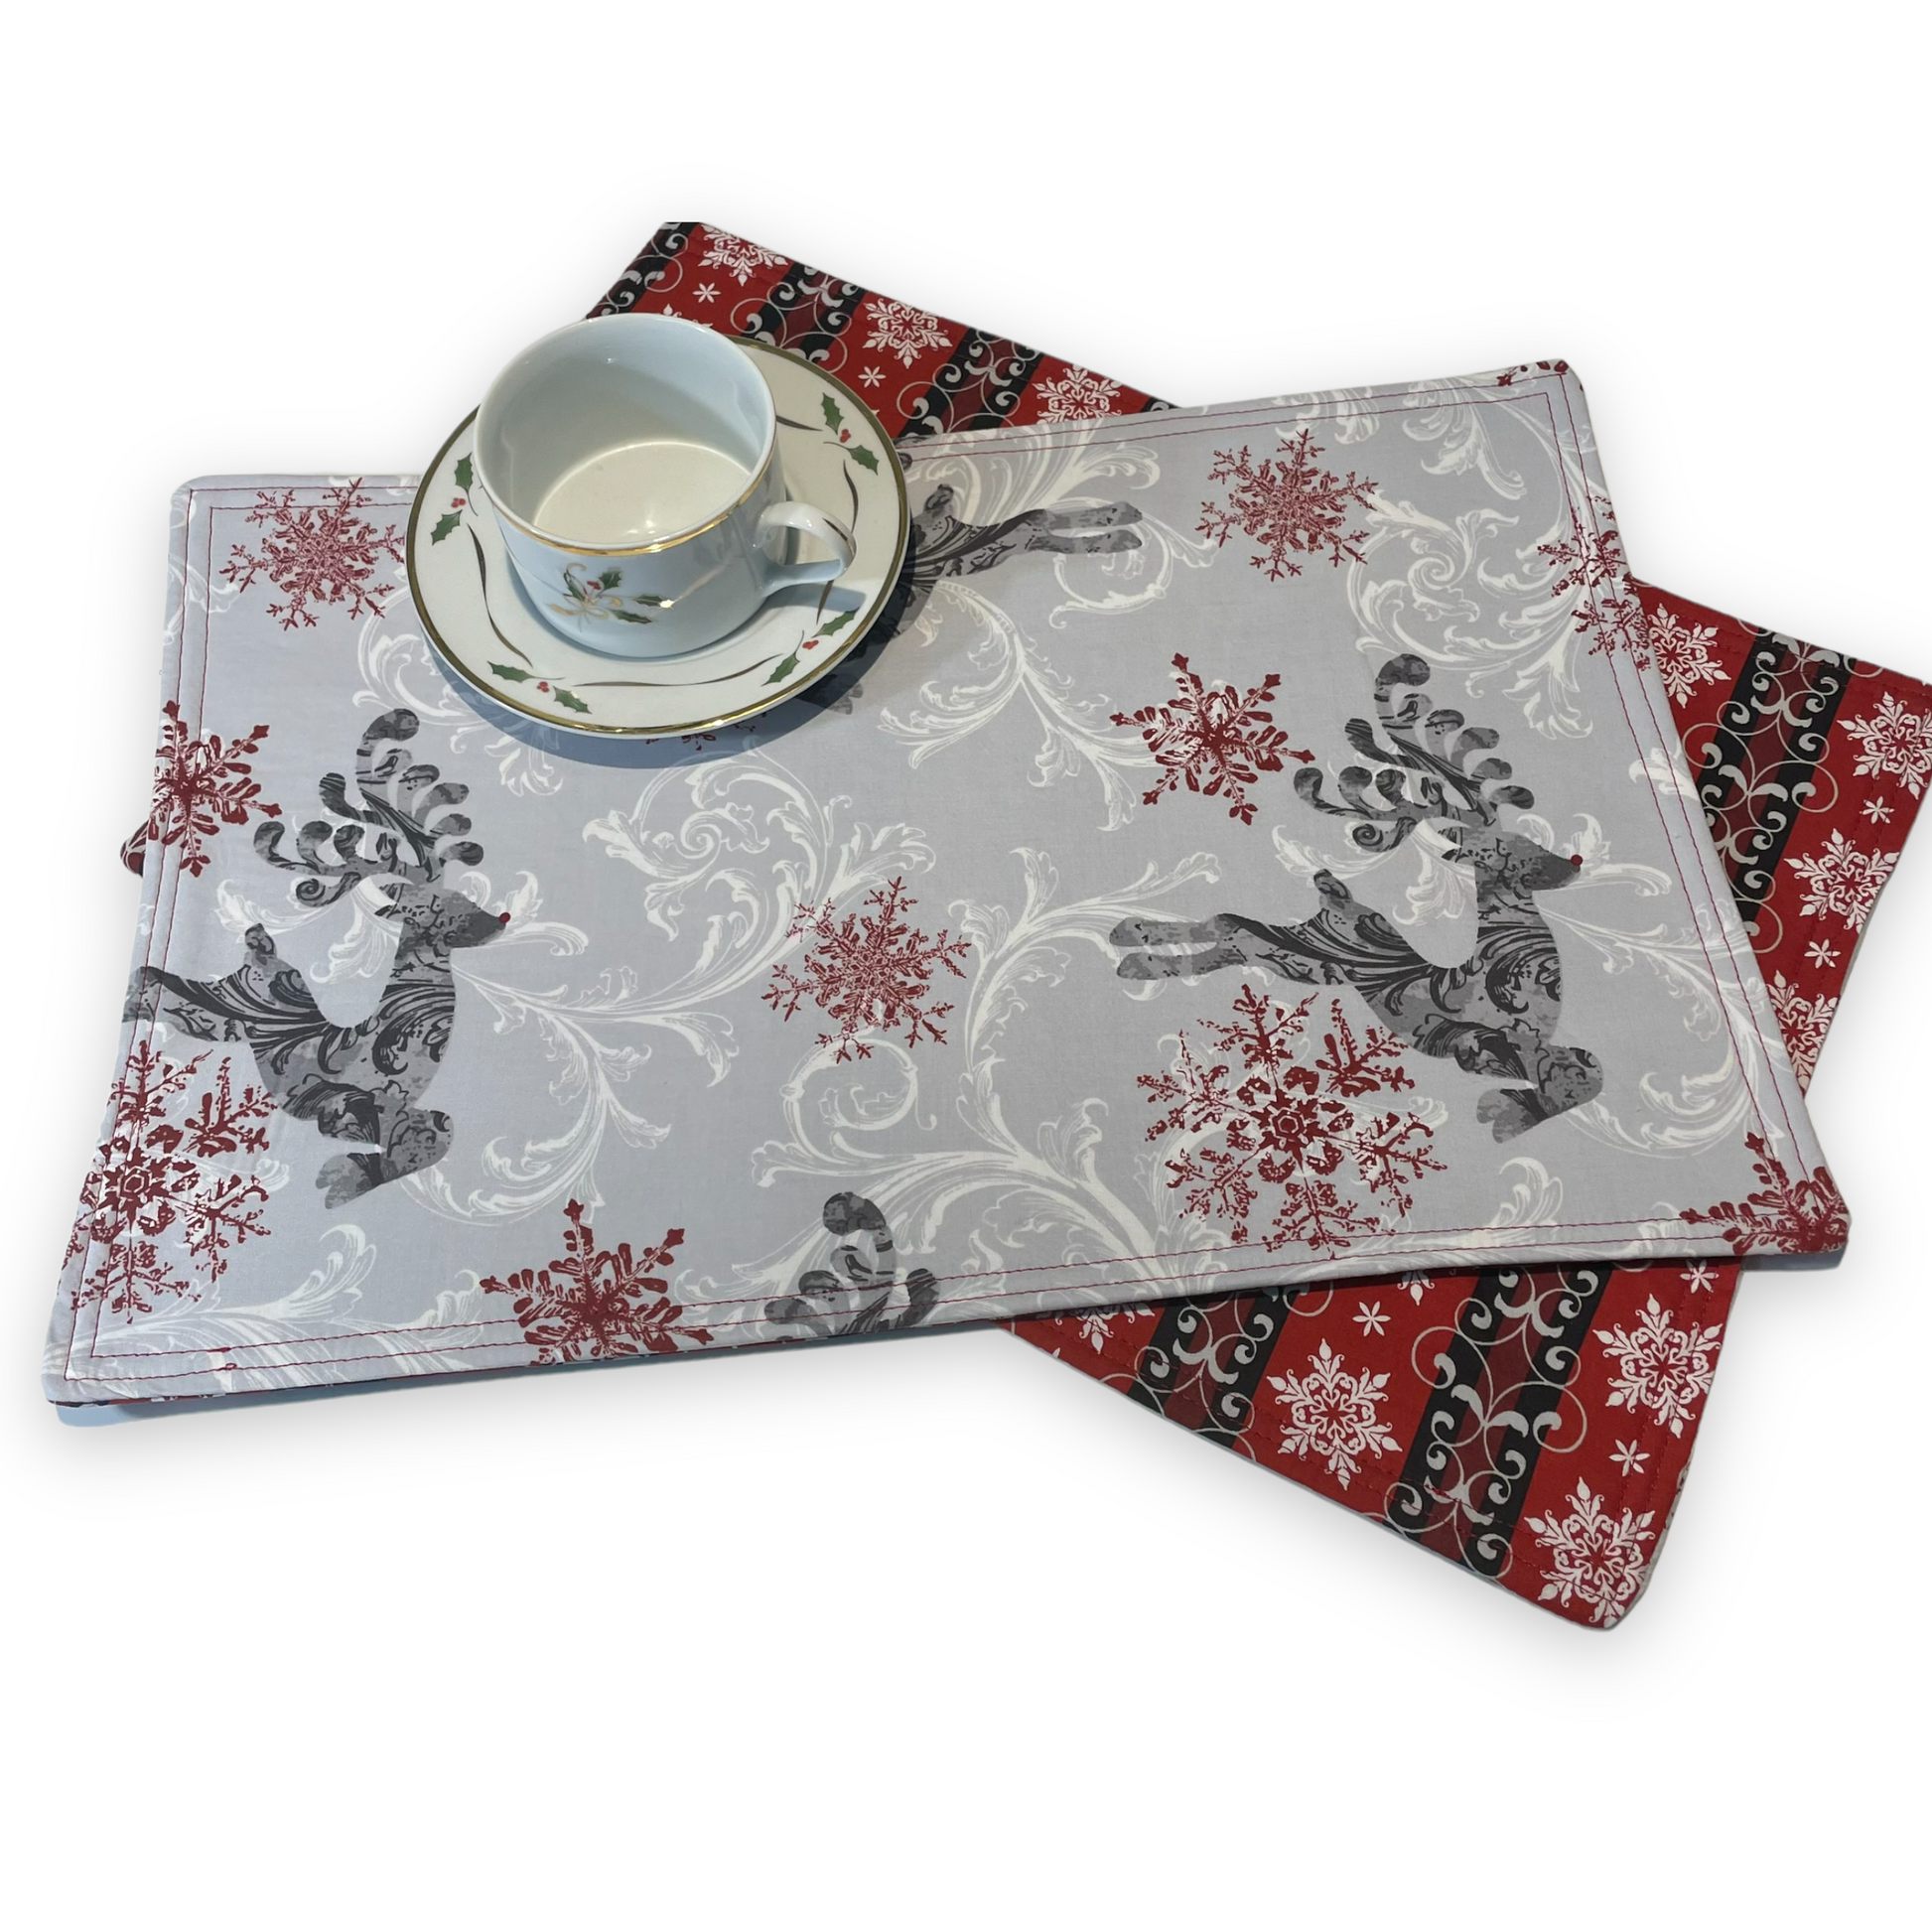 Set of Two Christmas Dinner Placemats, Reversible Set of Christmas Placeats - Home Stitchery Decor